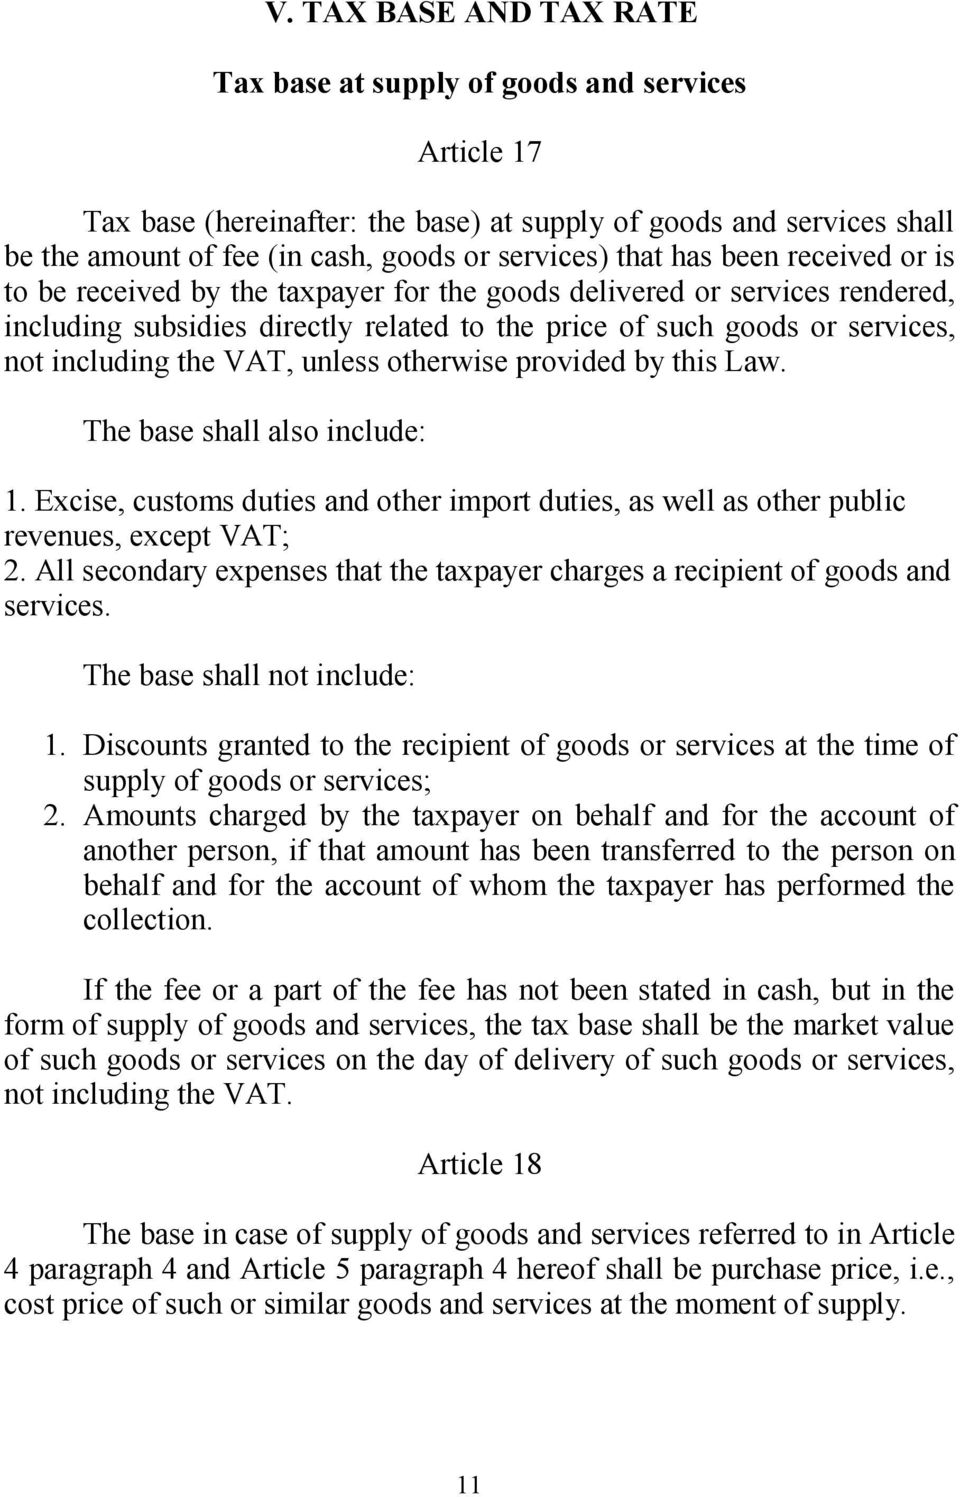 the VAT, unless otherwise provided by this Law. The base shall also include: 1. Excise, customs duties and other import duties, as well as other public revenues, except VAT; 2.